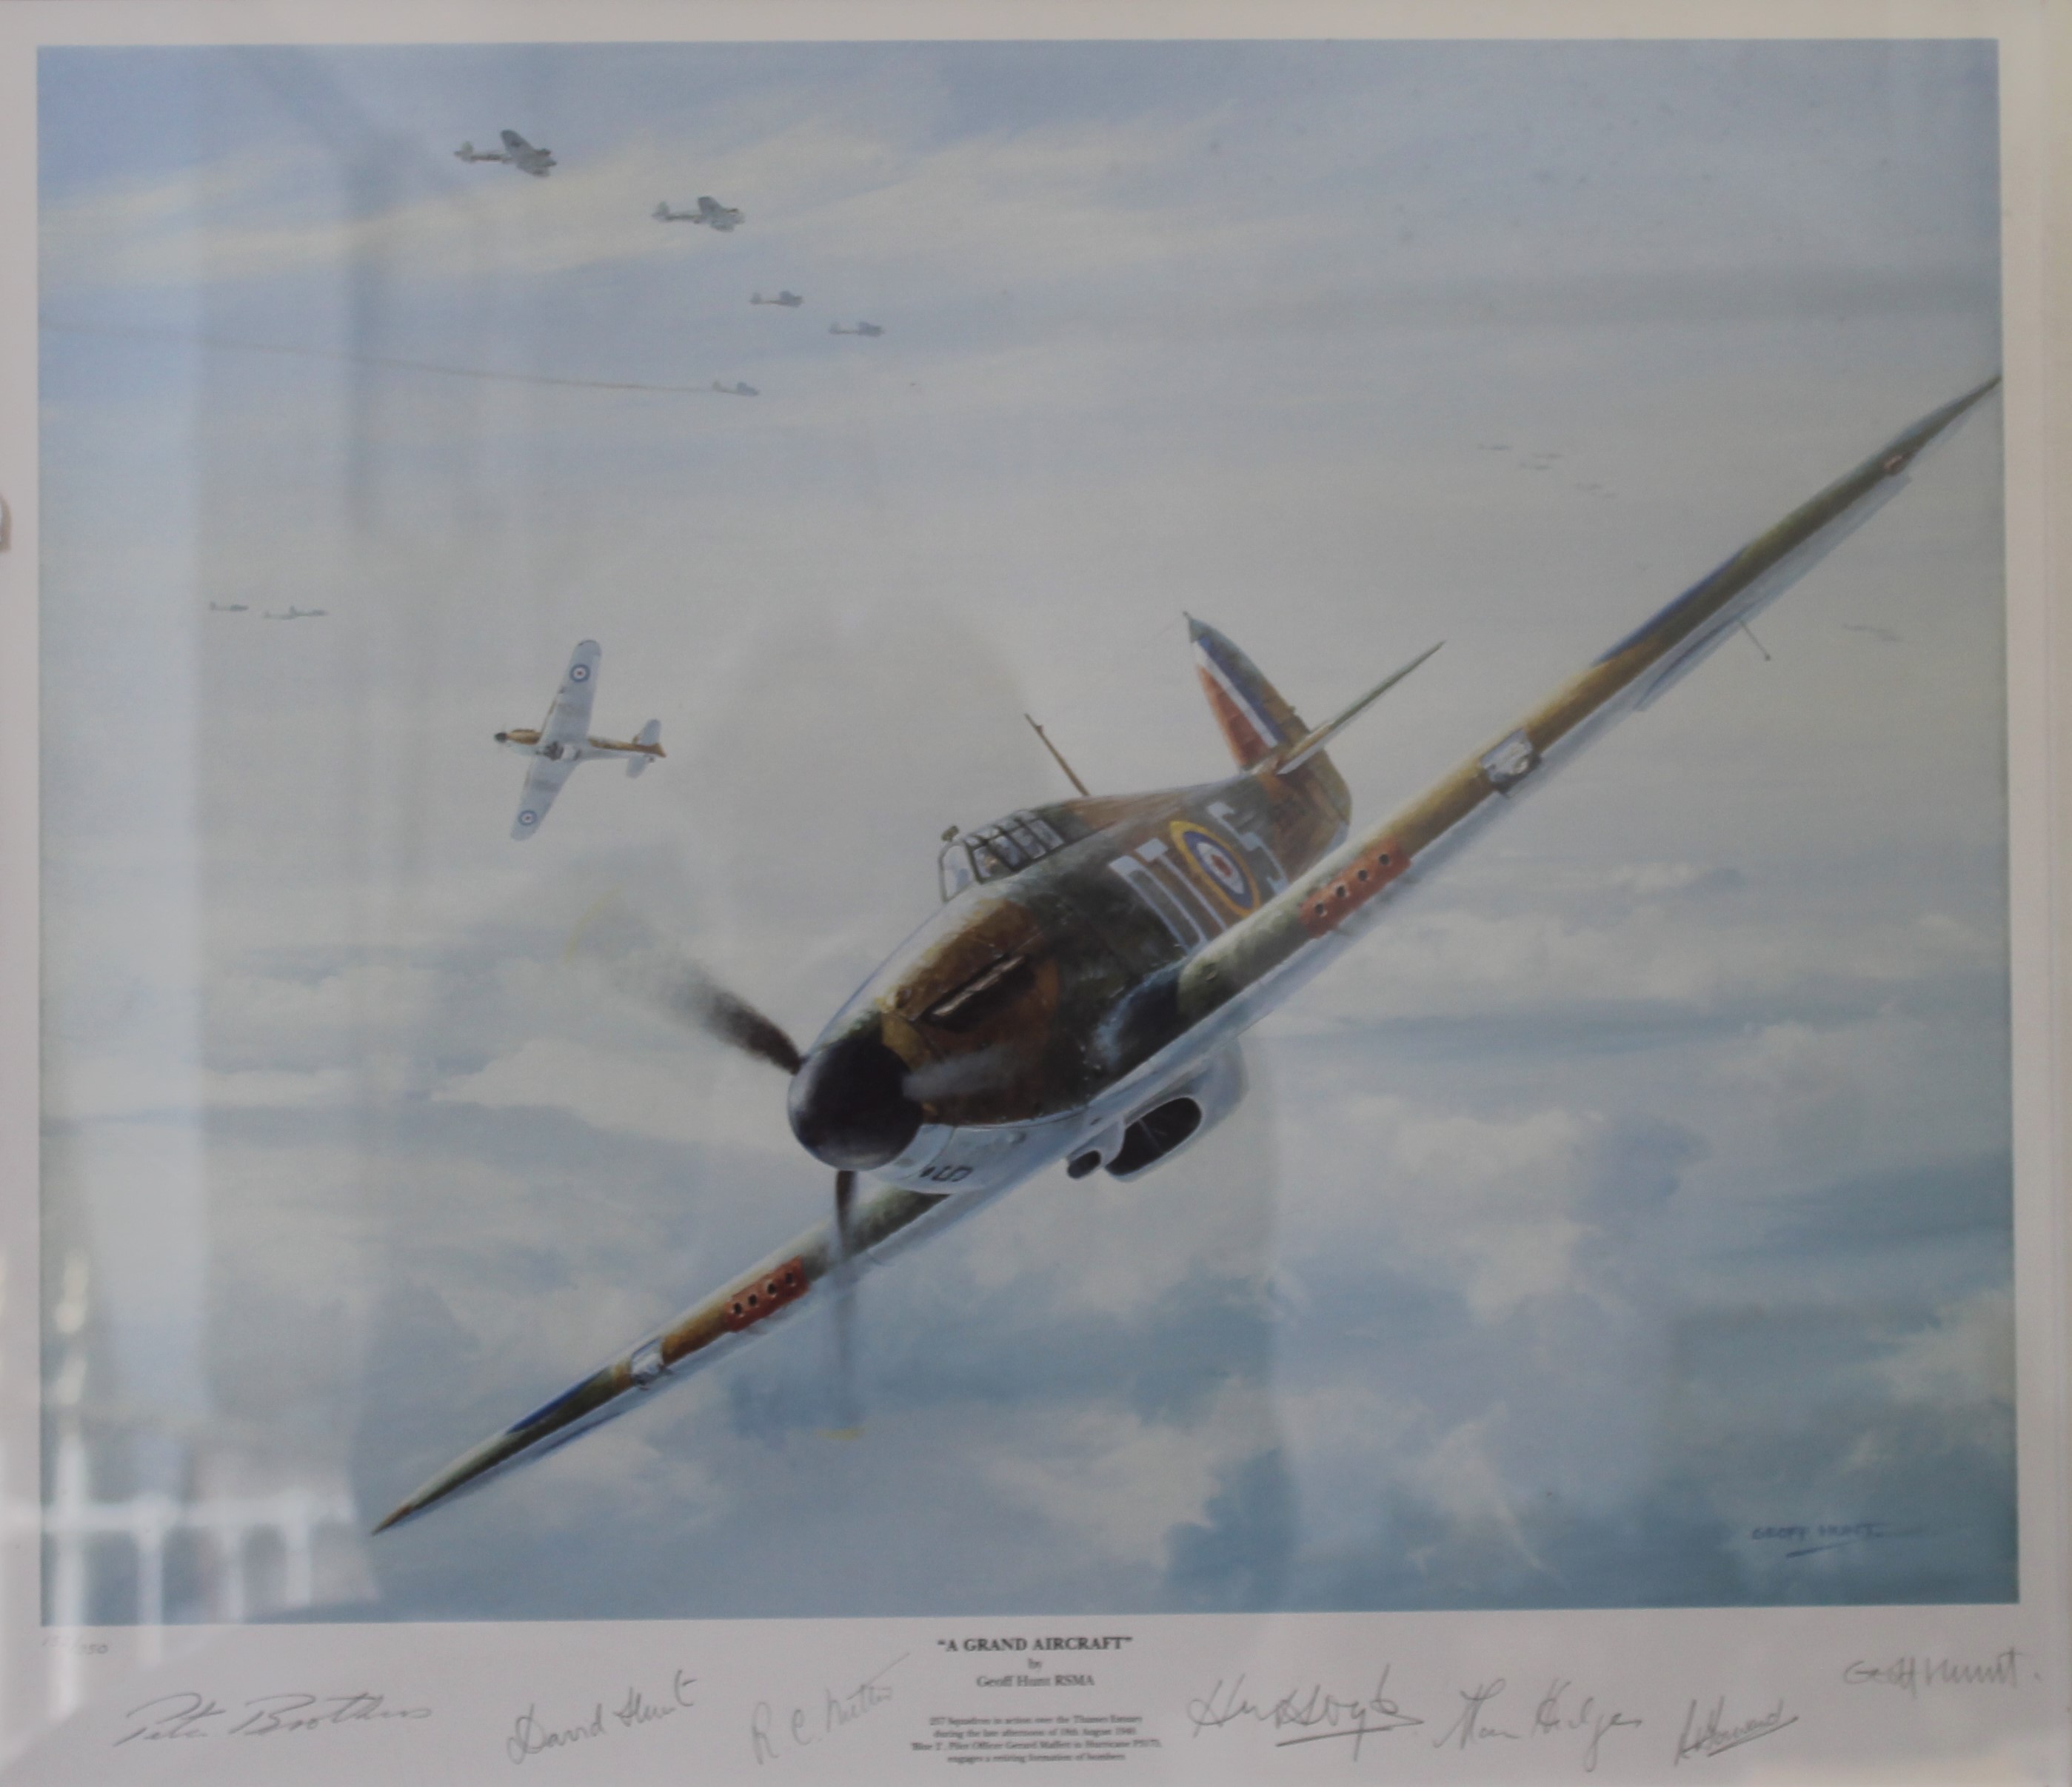 GEOFF HUNT, A Grand Aircraft, limited edition print, numbered 152/950,